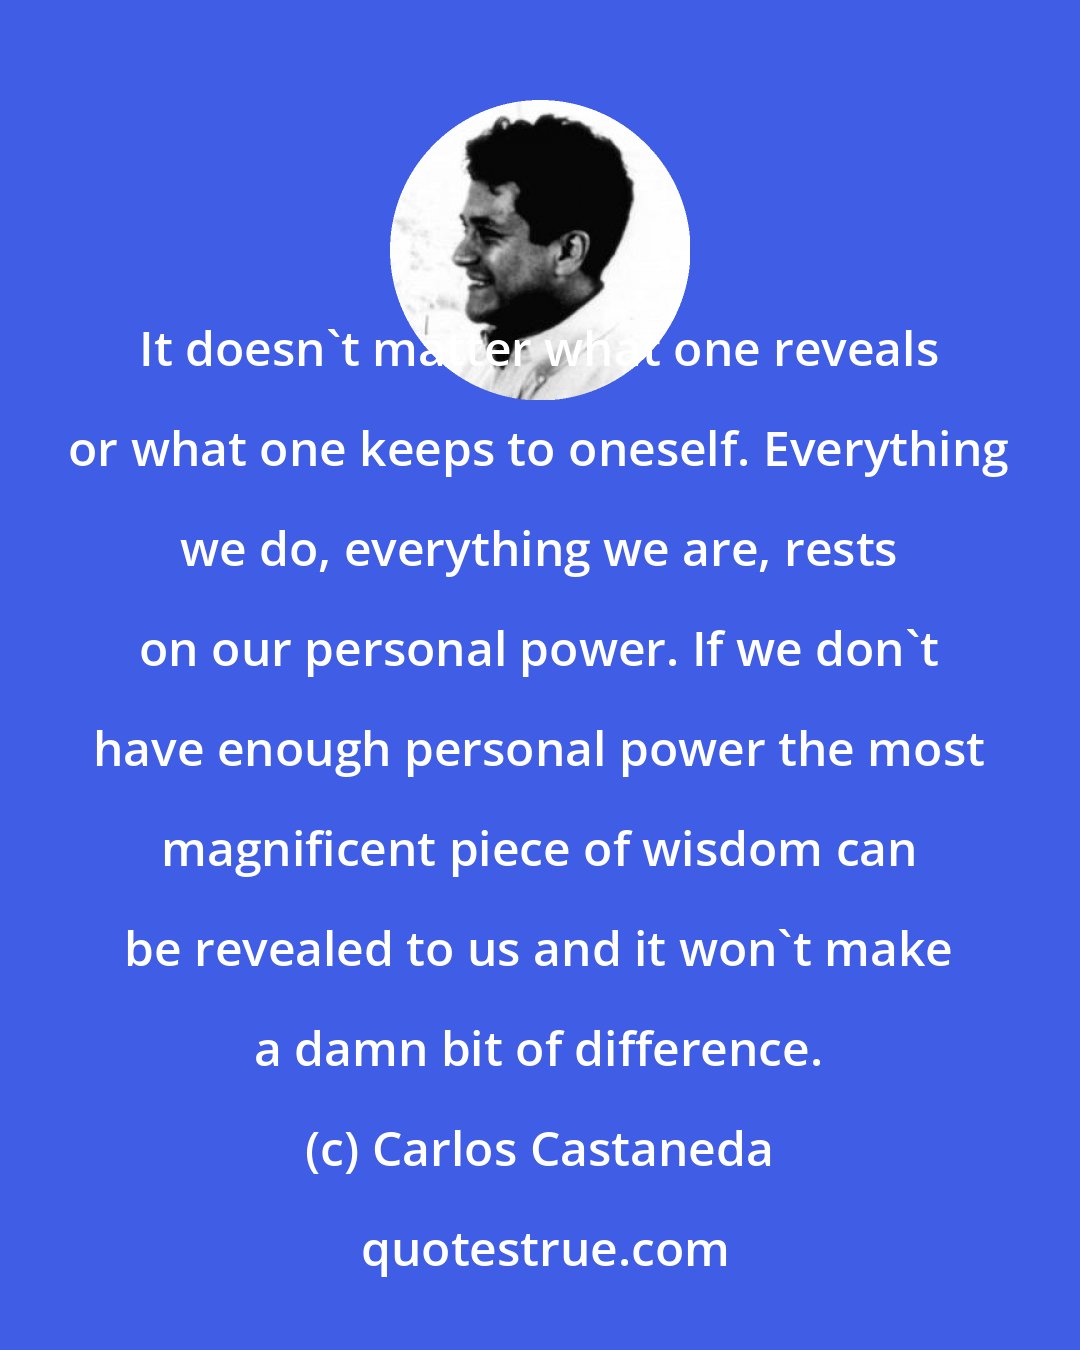 Carlos Castaneda: It doesn't matter what one reveals or what one keeps to oneself. Everything we do, everything we are, rests on our personal power. If we don't have enough personal power the most magnificent piece of wisdom can be revealed to us and it won't make a damn bit of difference.